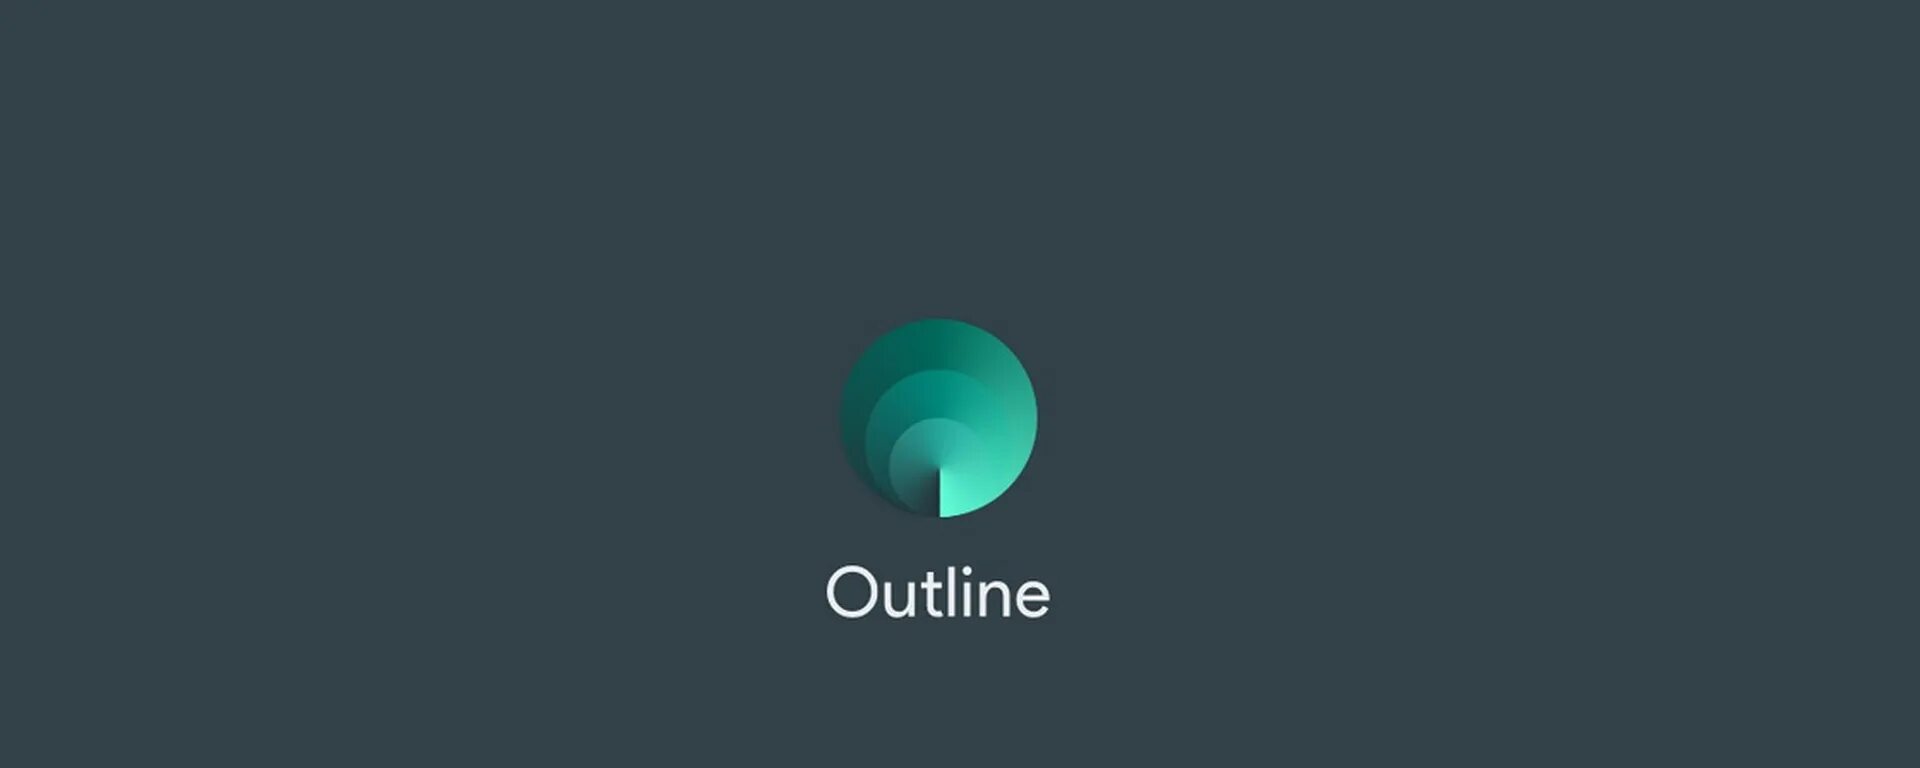 Outline VPN. Outline VPN logo. Outline VPN skachat. Outline VPN icon PNG.